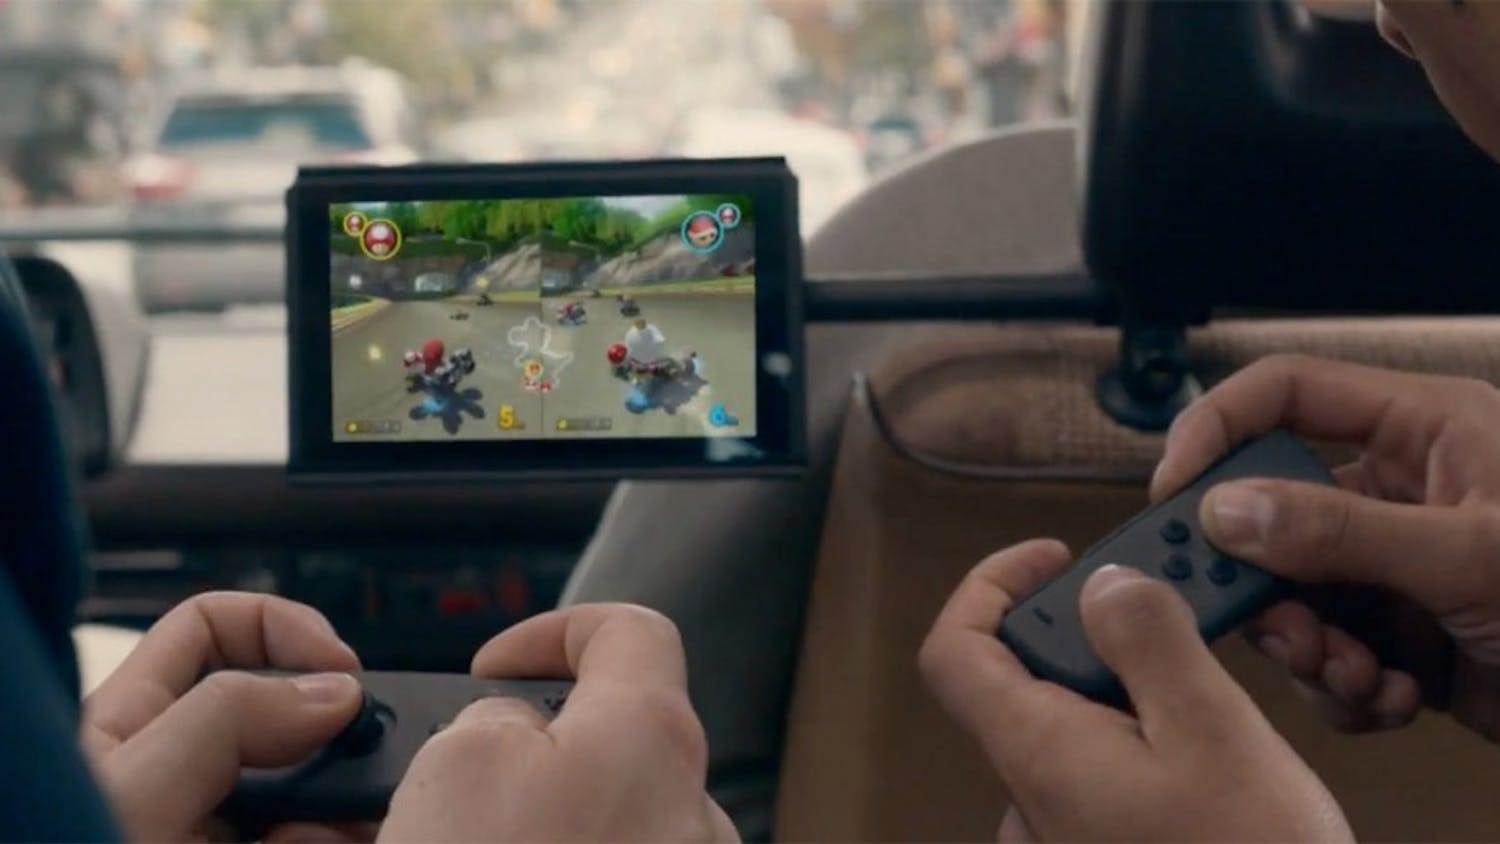 The Switch from Nintendo combines the mobility of a handheld with the power of a home gaming system to enable new video game play styles. It will be available in March 2017. (Handout/TNS)